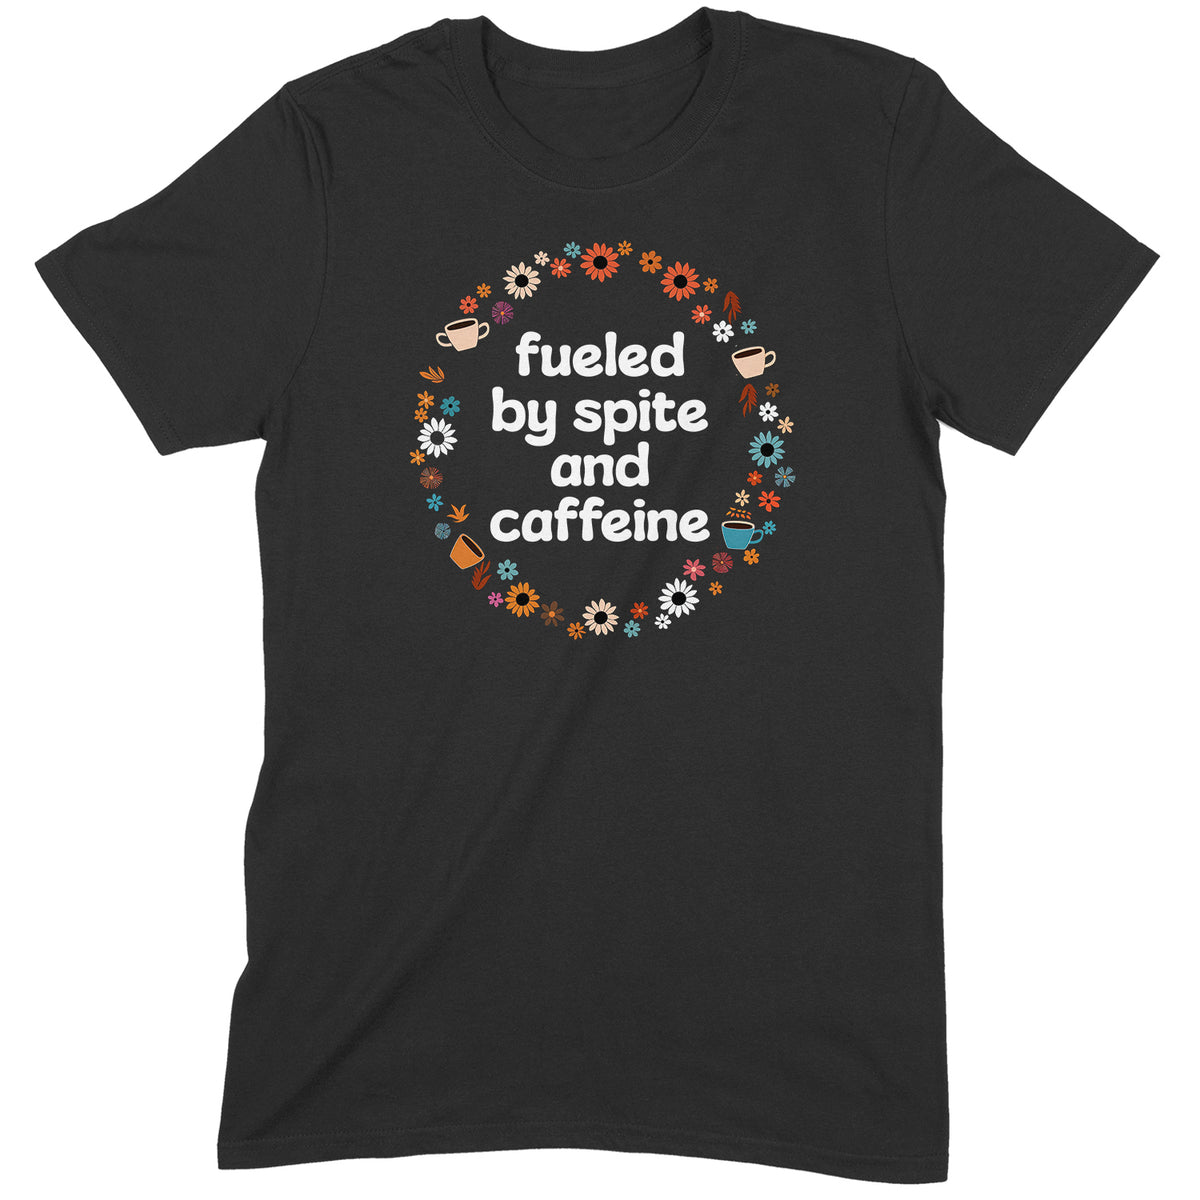 "Fueled By Spite" Premium Midweight Ringspun Cotton T-Shirt - Mens/Womens Fits